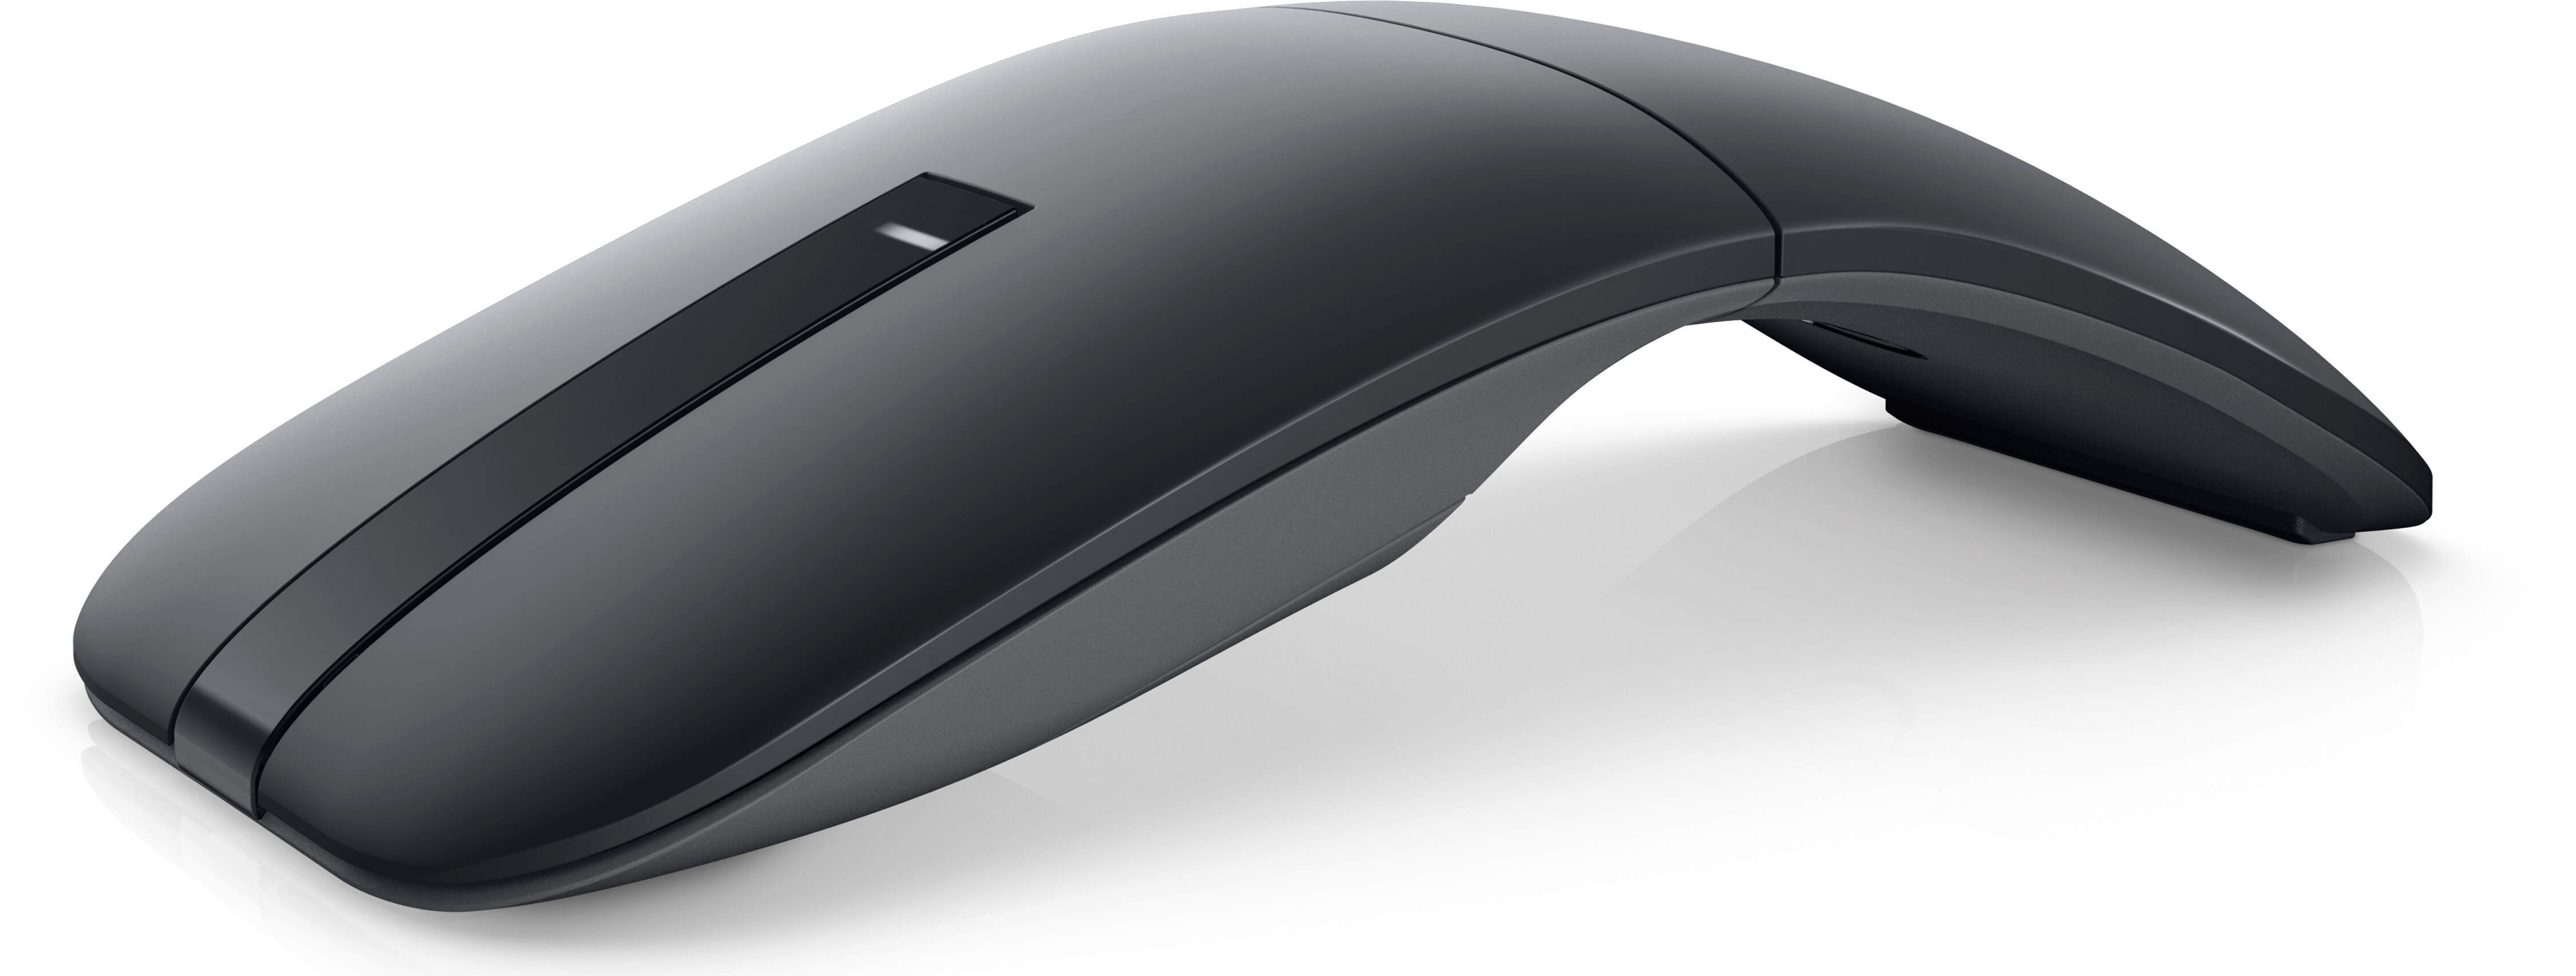 Dell Bluetooth Travel Mouse (MS700) - Computer Mouse | Dell USA